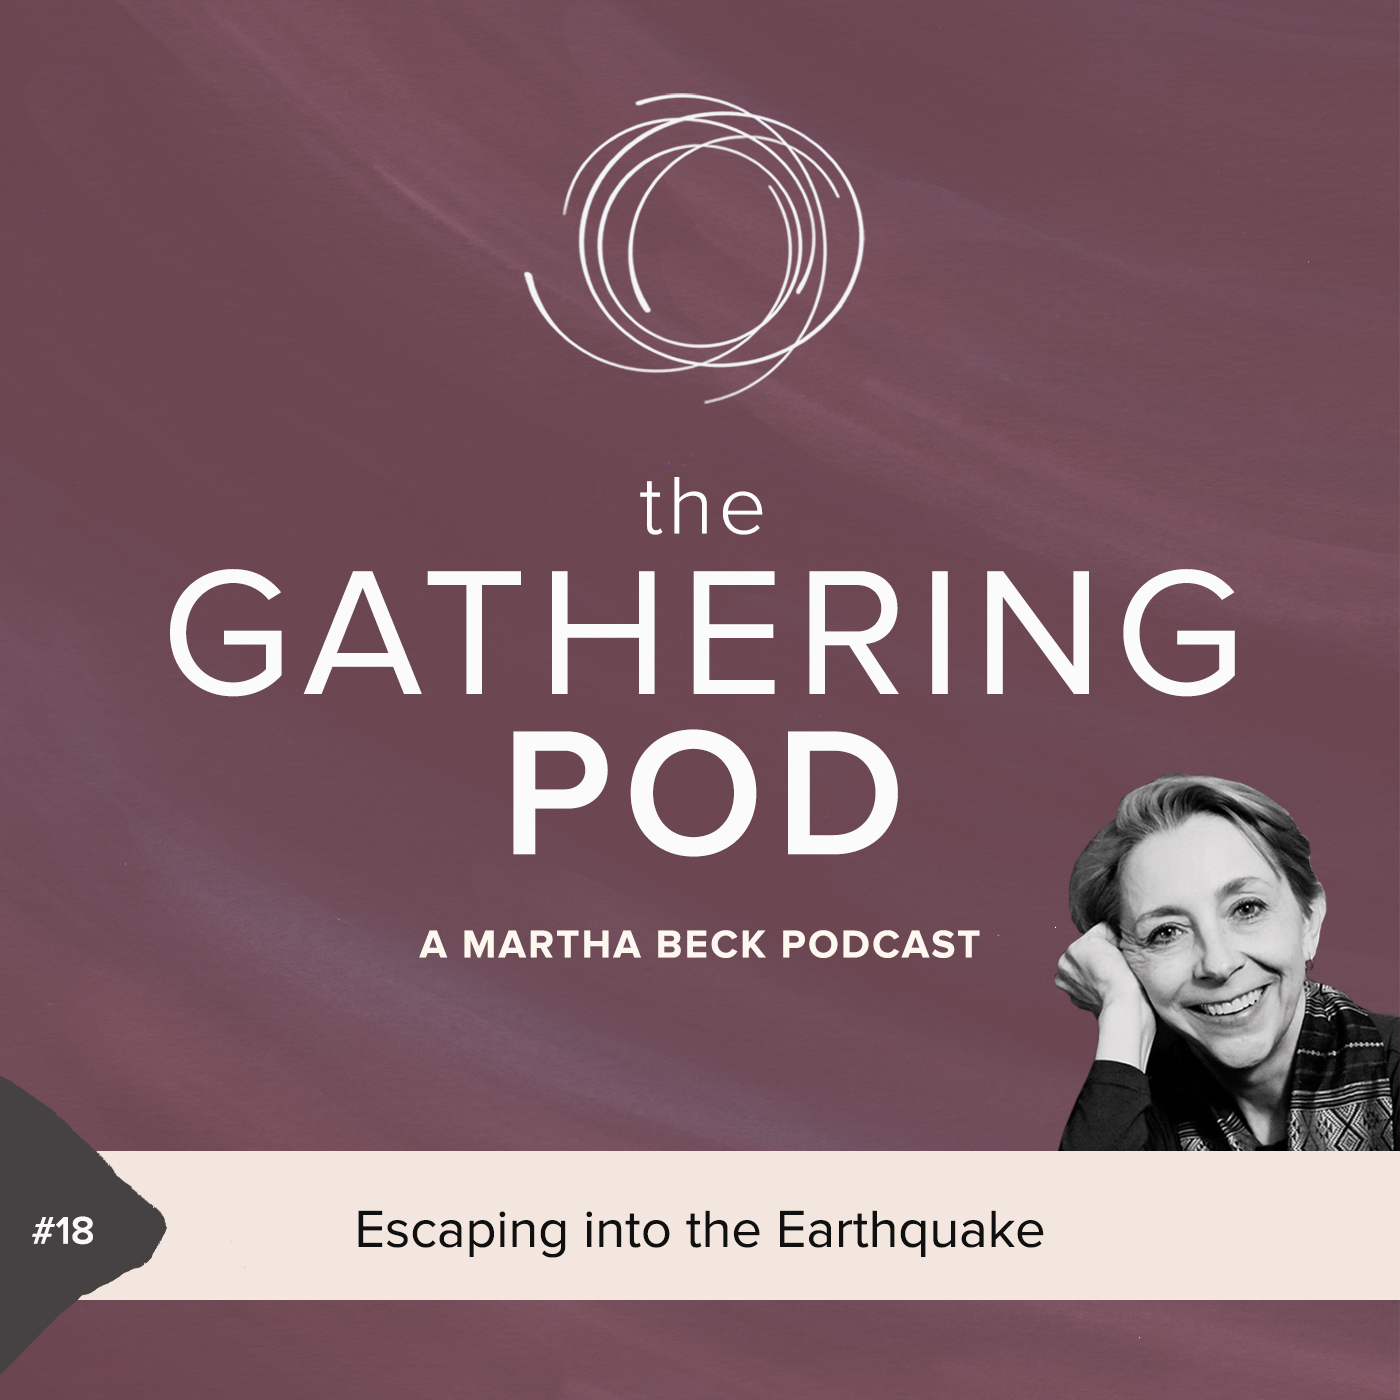 Image for The Gathering Pod A Martha Beck Podcast Episode #18 Escaping into the Earthquake